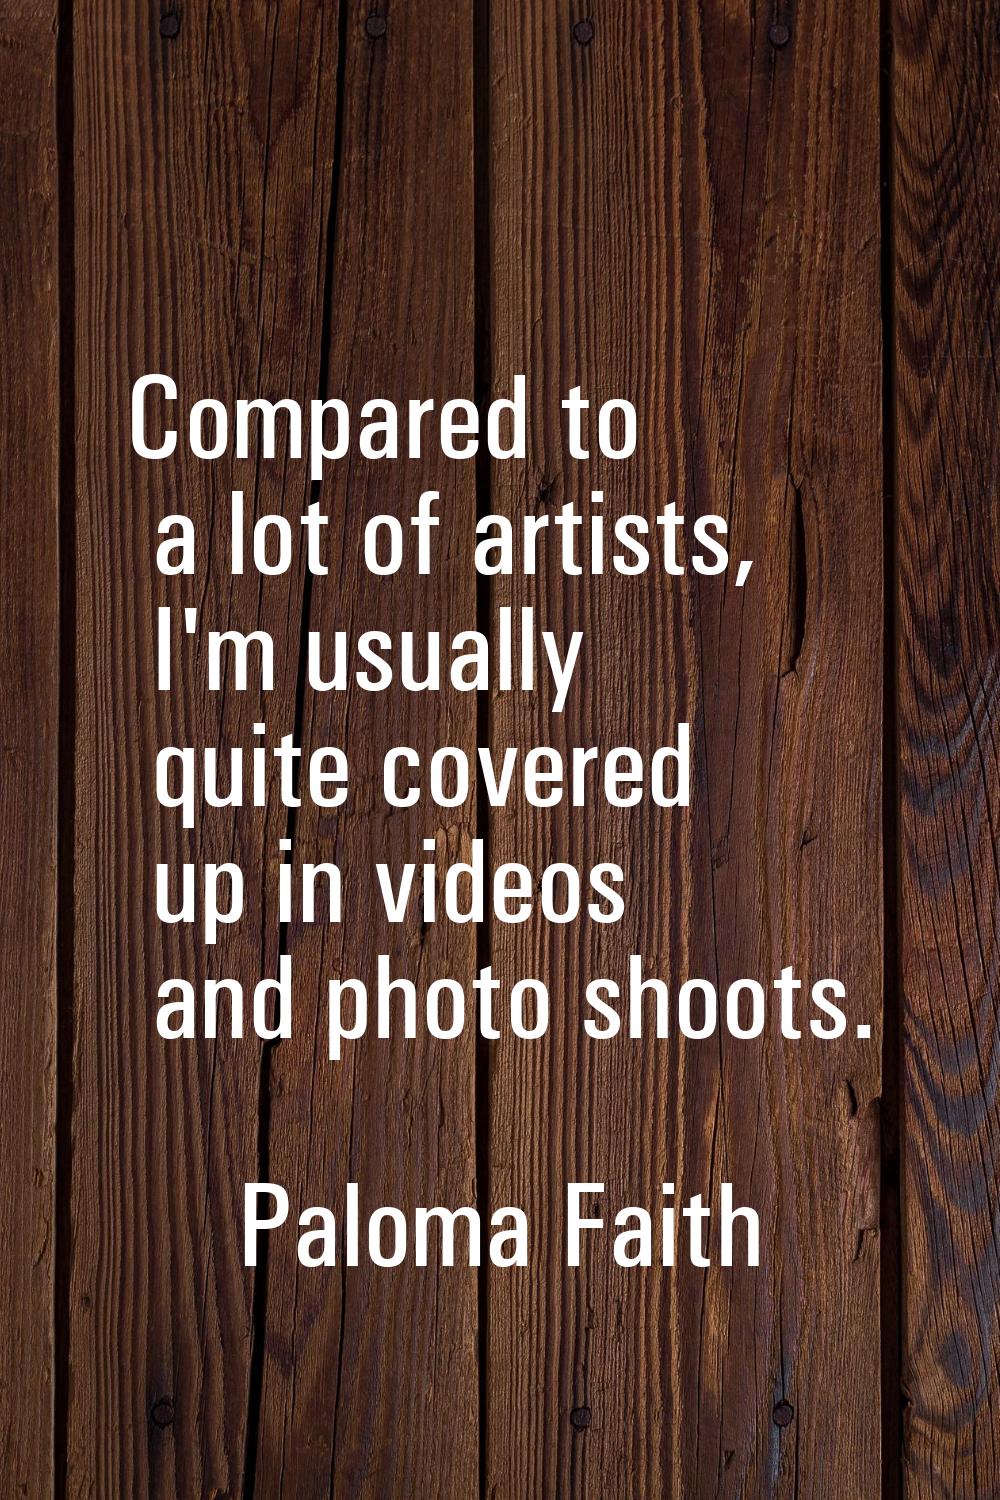 Compared to a lot of artists, I'm usually quite covered up in videos and photo shoots.